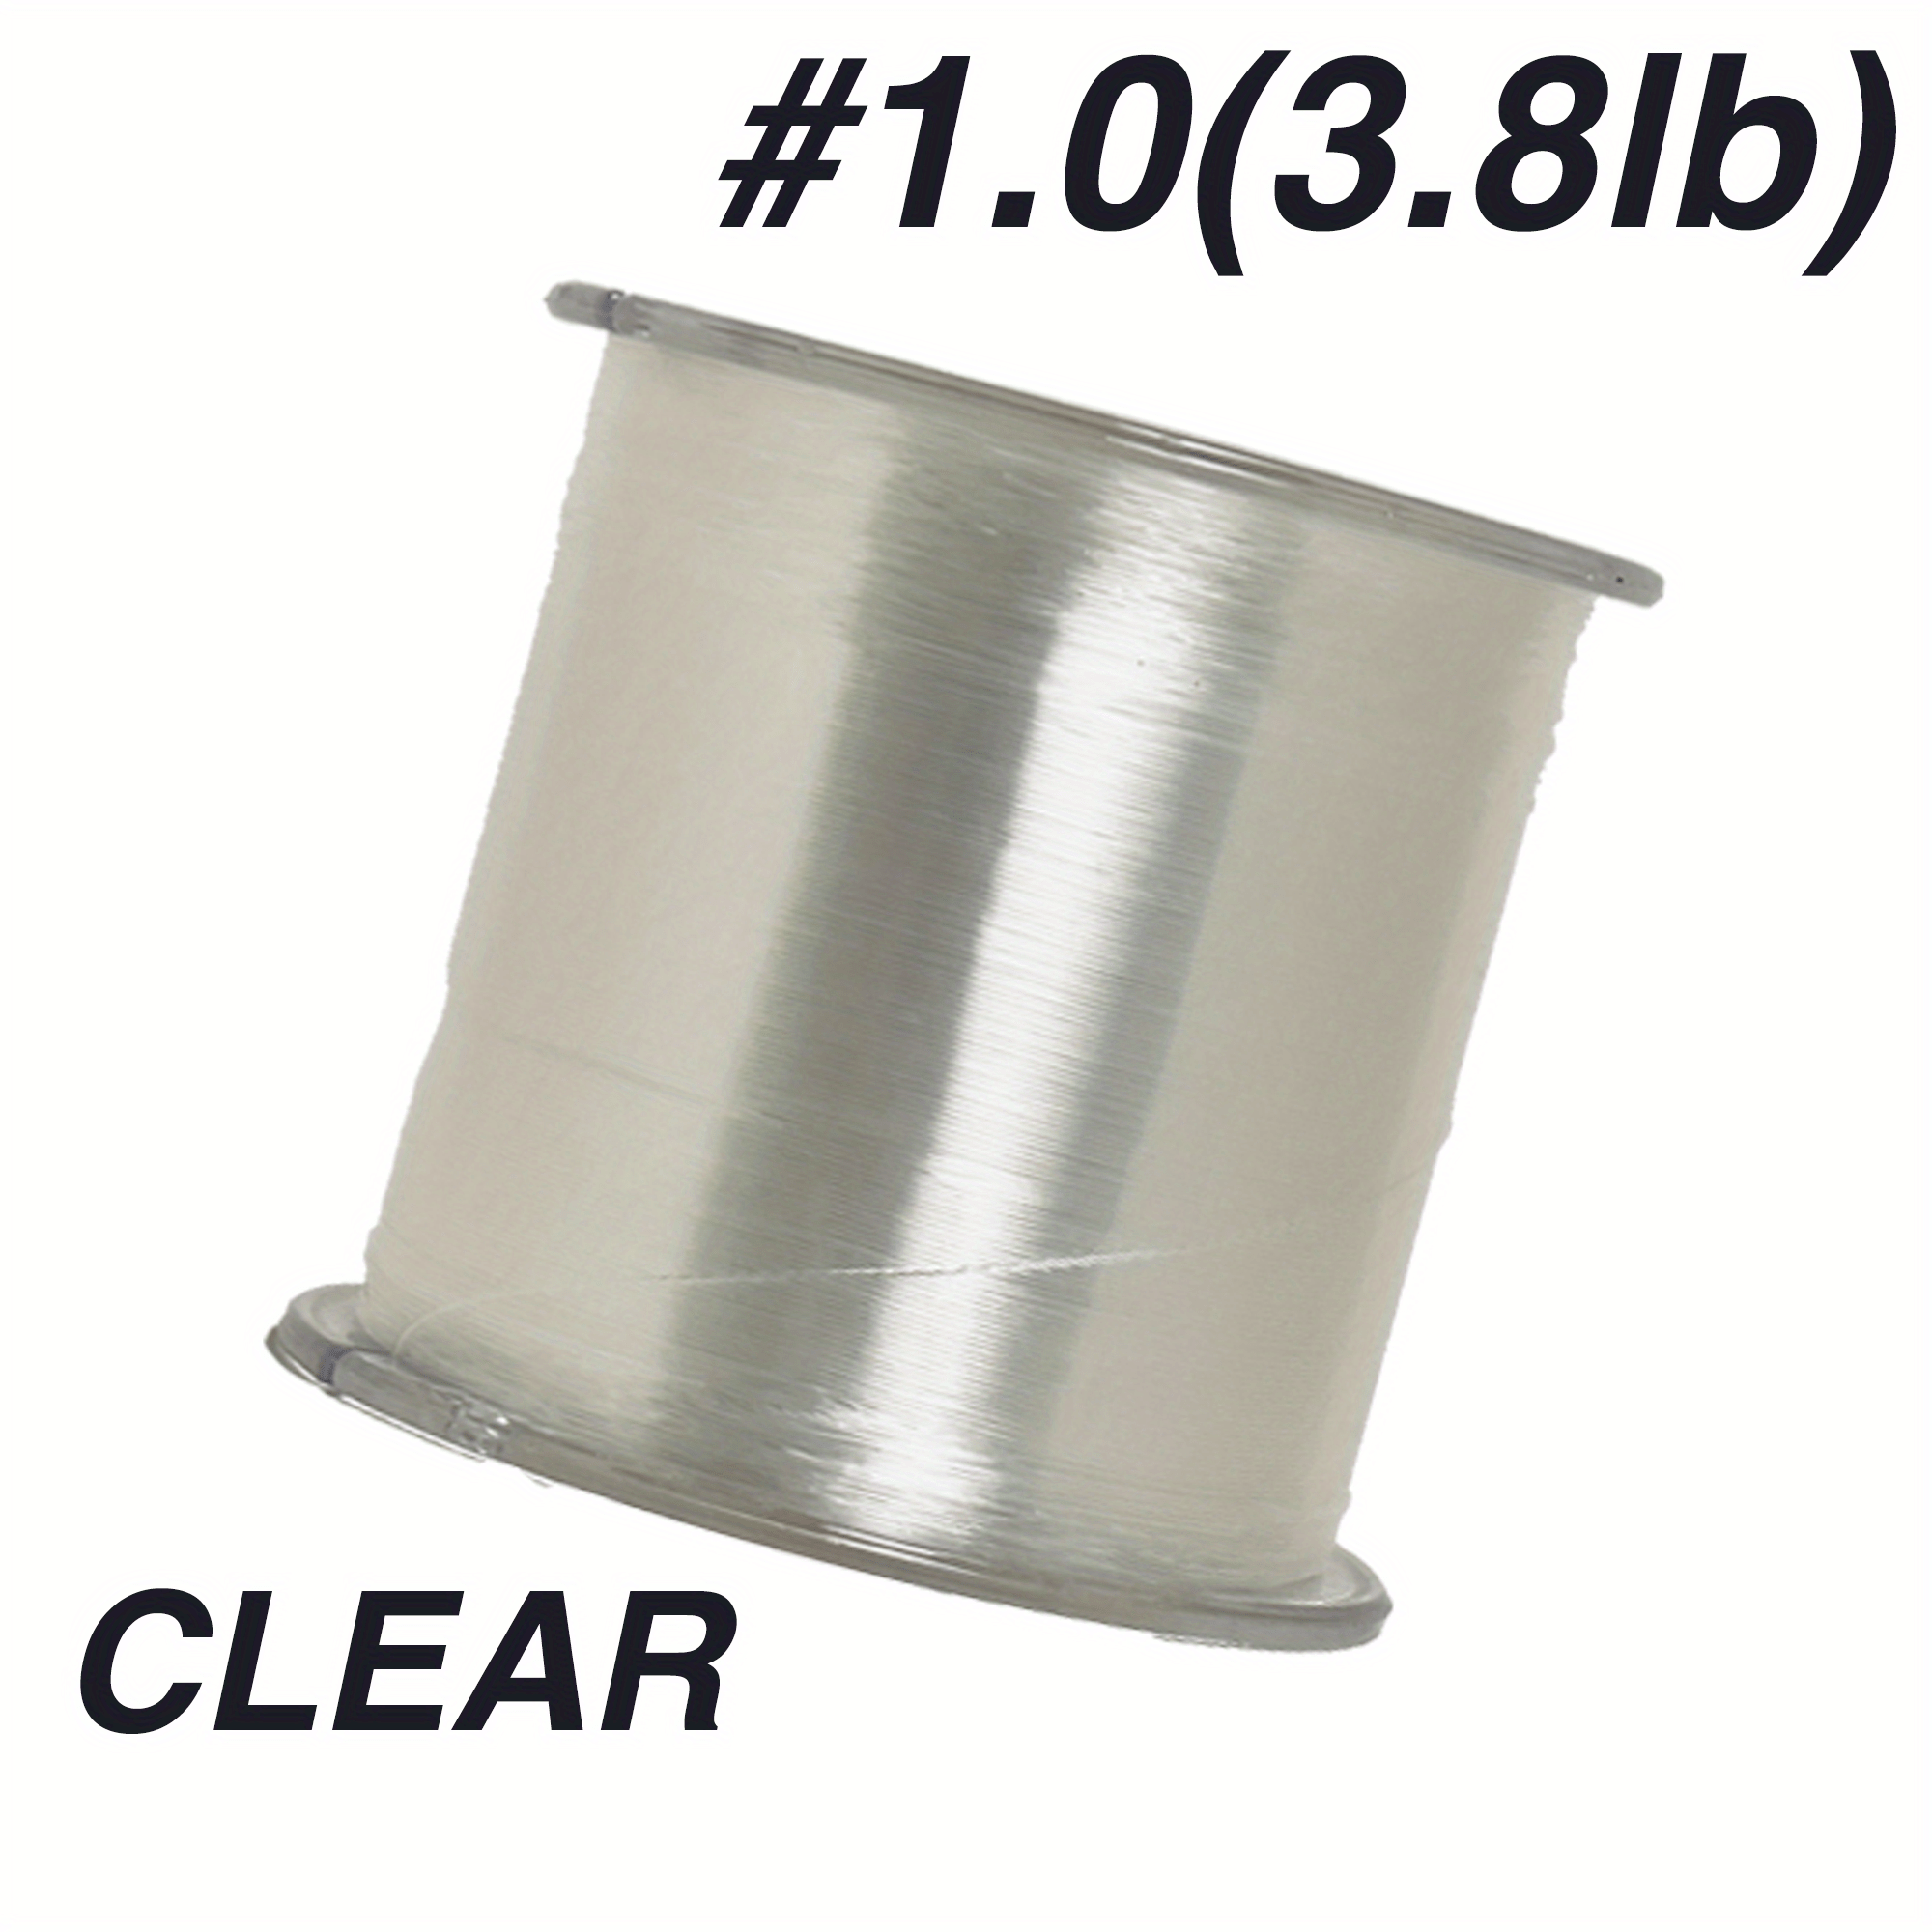 3pcs Monofilament Fishing Line Clear Nylon Sea Fishing .1mm Saltwater and Freshwater, Size: 100m